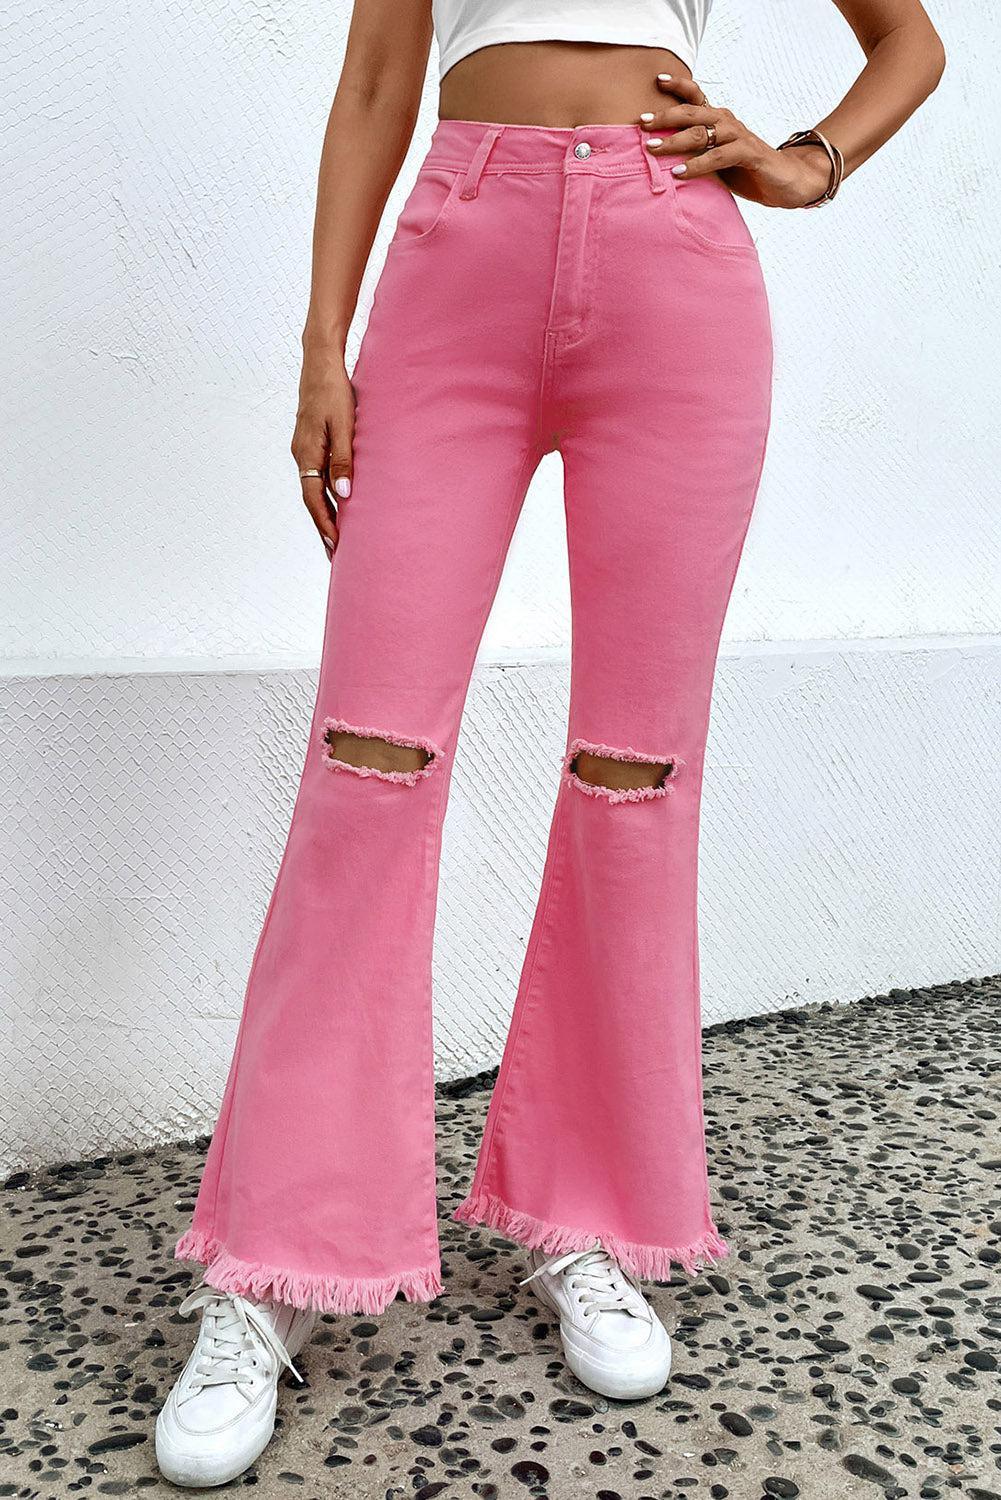 a woman in a white top and pink jeans